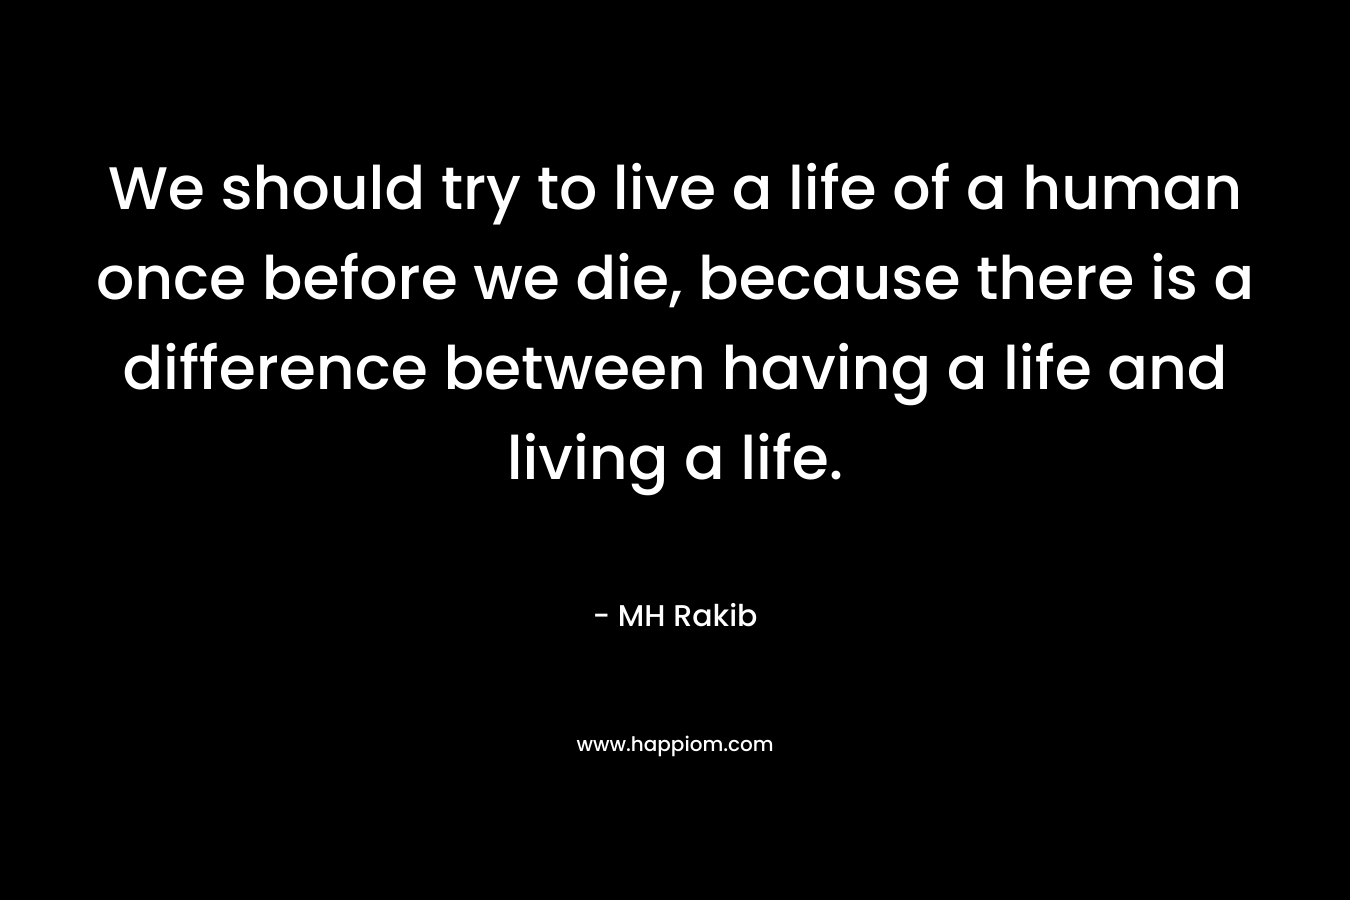 We should try to live a life of a human once before we die, because there is a difference between having a life and living a life.